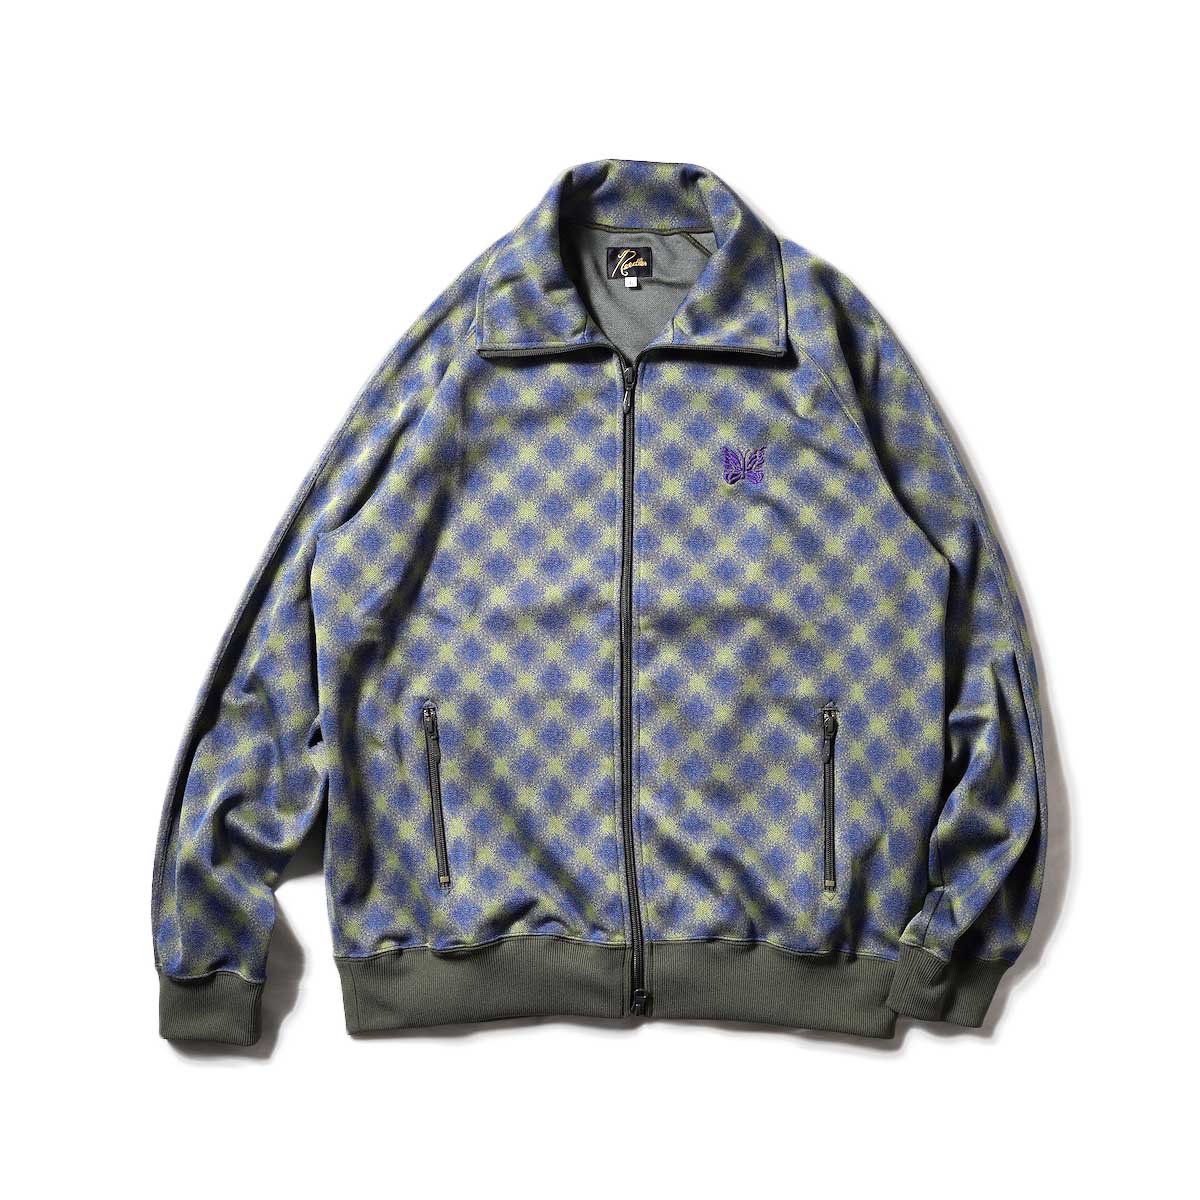 Needles / TRACK JACKET - POLY JQ (Blue/Olive)正面